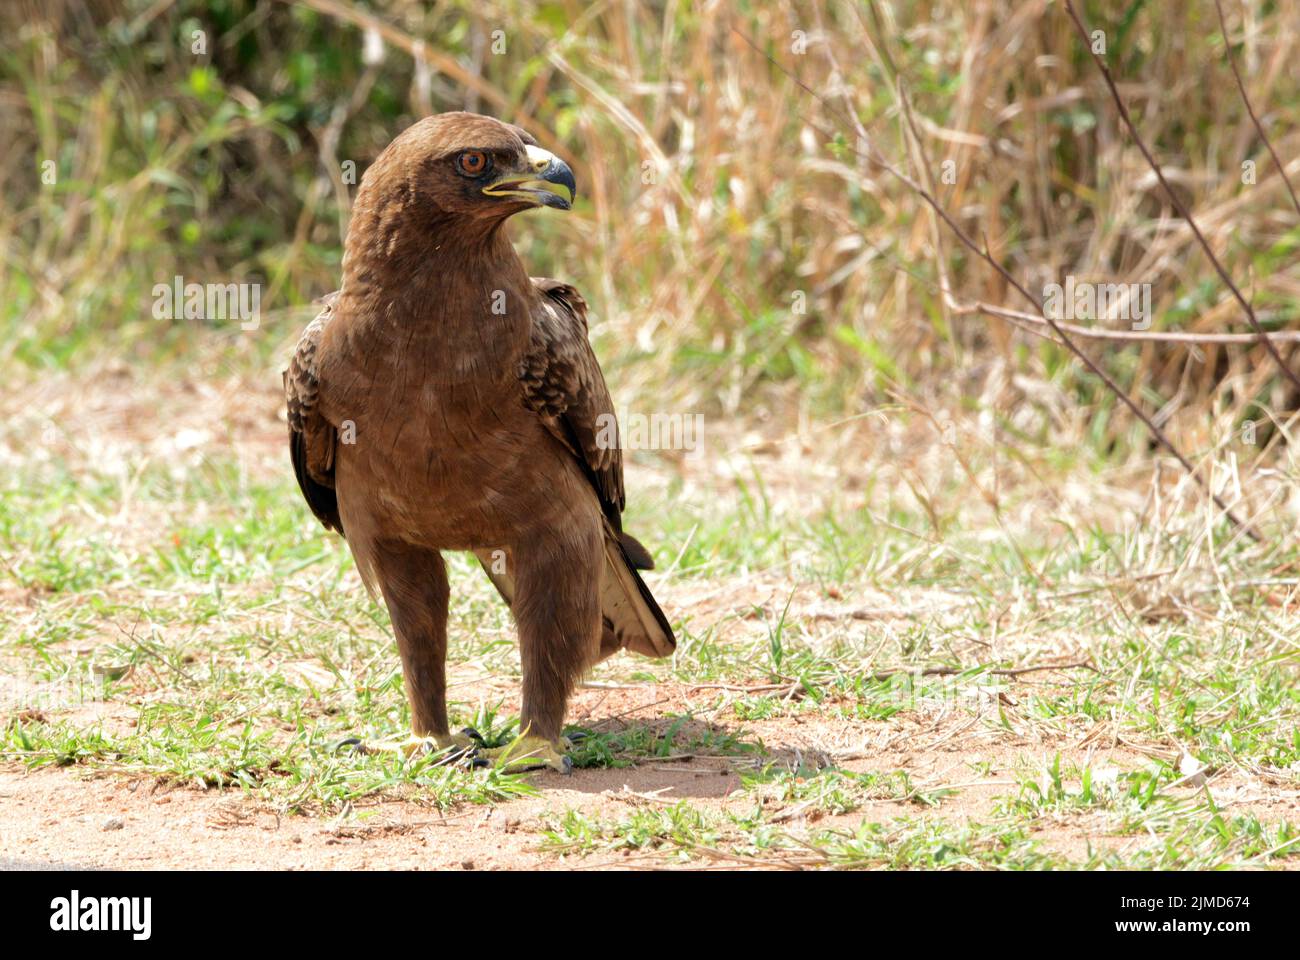 Wahlberg's eagle in Kruger National Park, South Africa Stock Photo